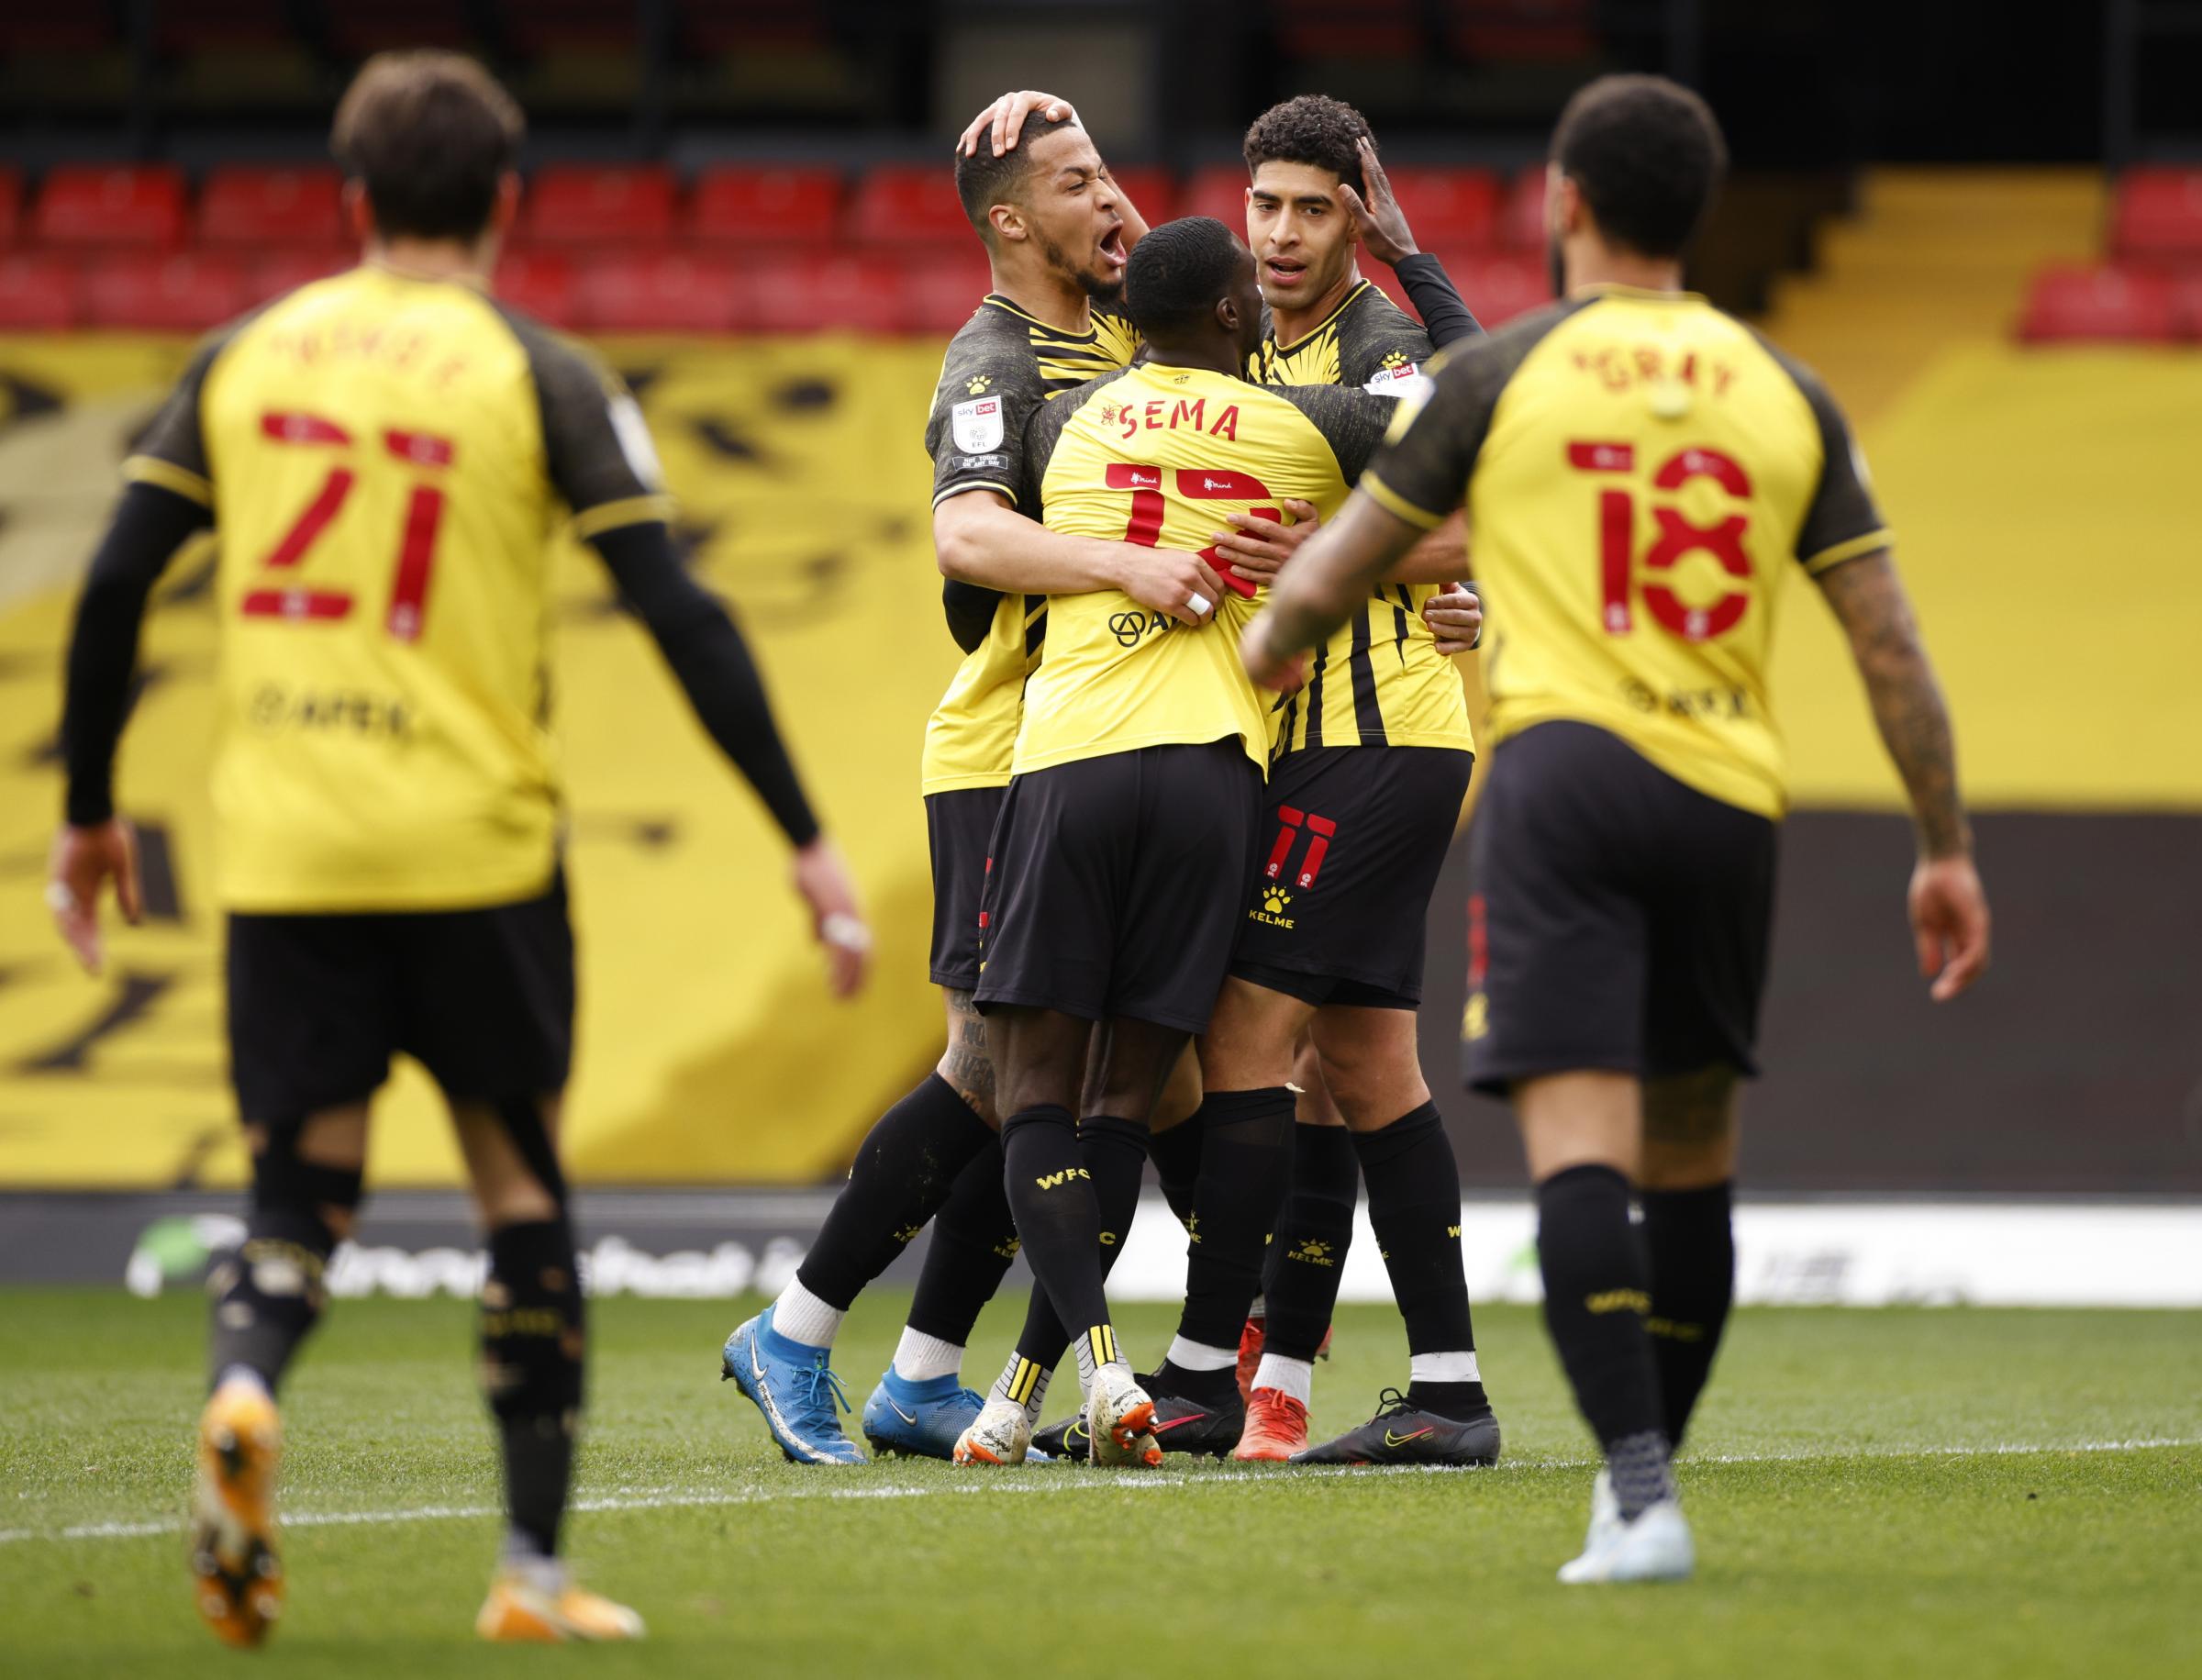 Watford 1-0 Nottingham Forest: Hornets hold on to claim victory